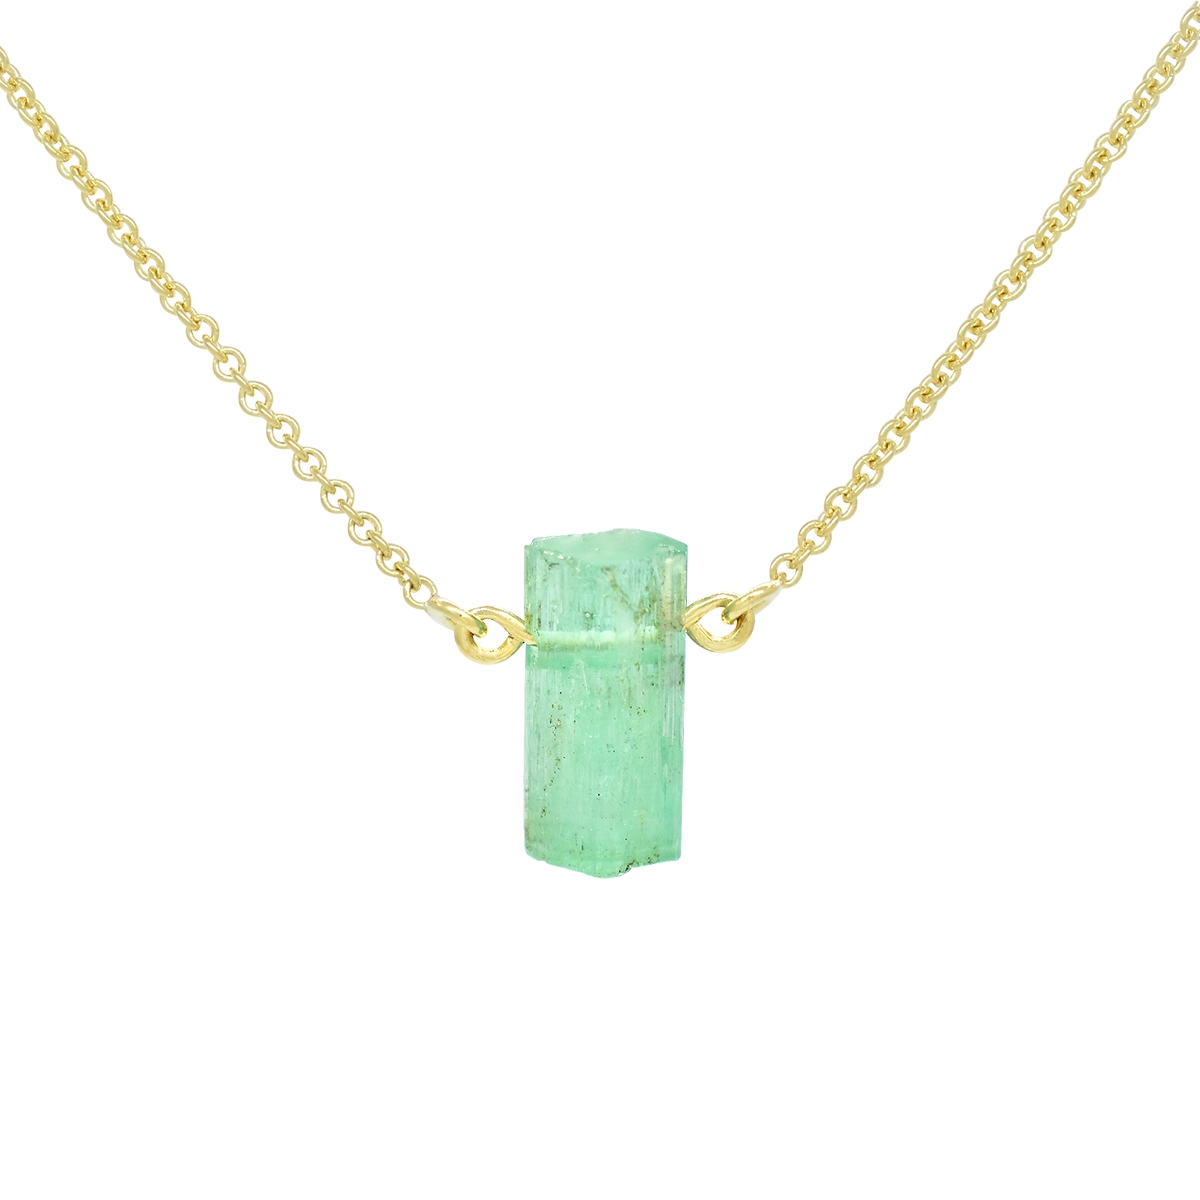 Emerald necklace with 3 carat uncut natural emerald in its natural state, set in 18K gold solitaire necklace